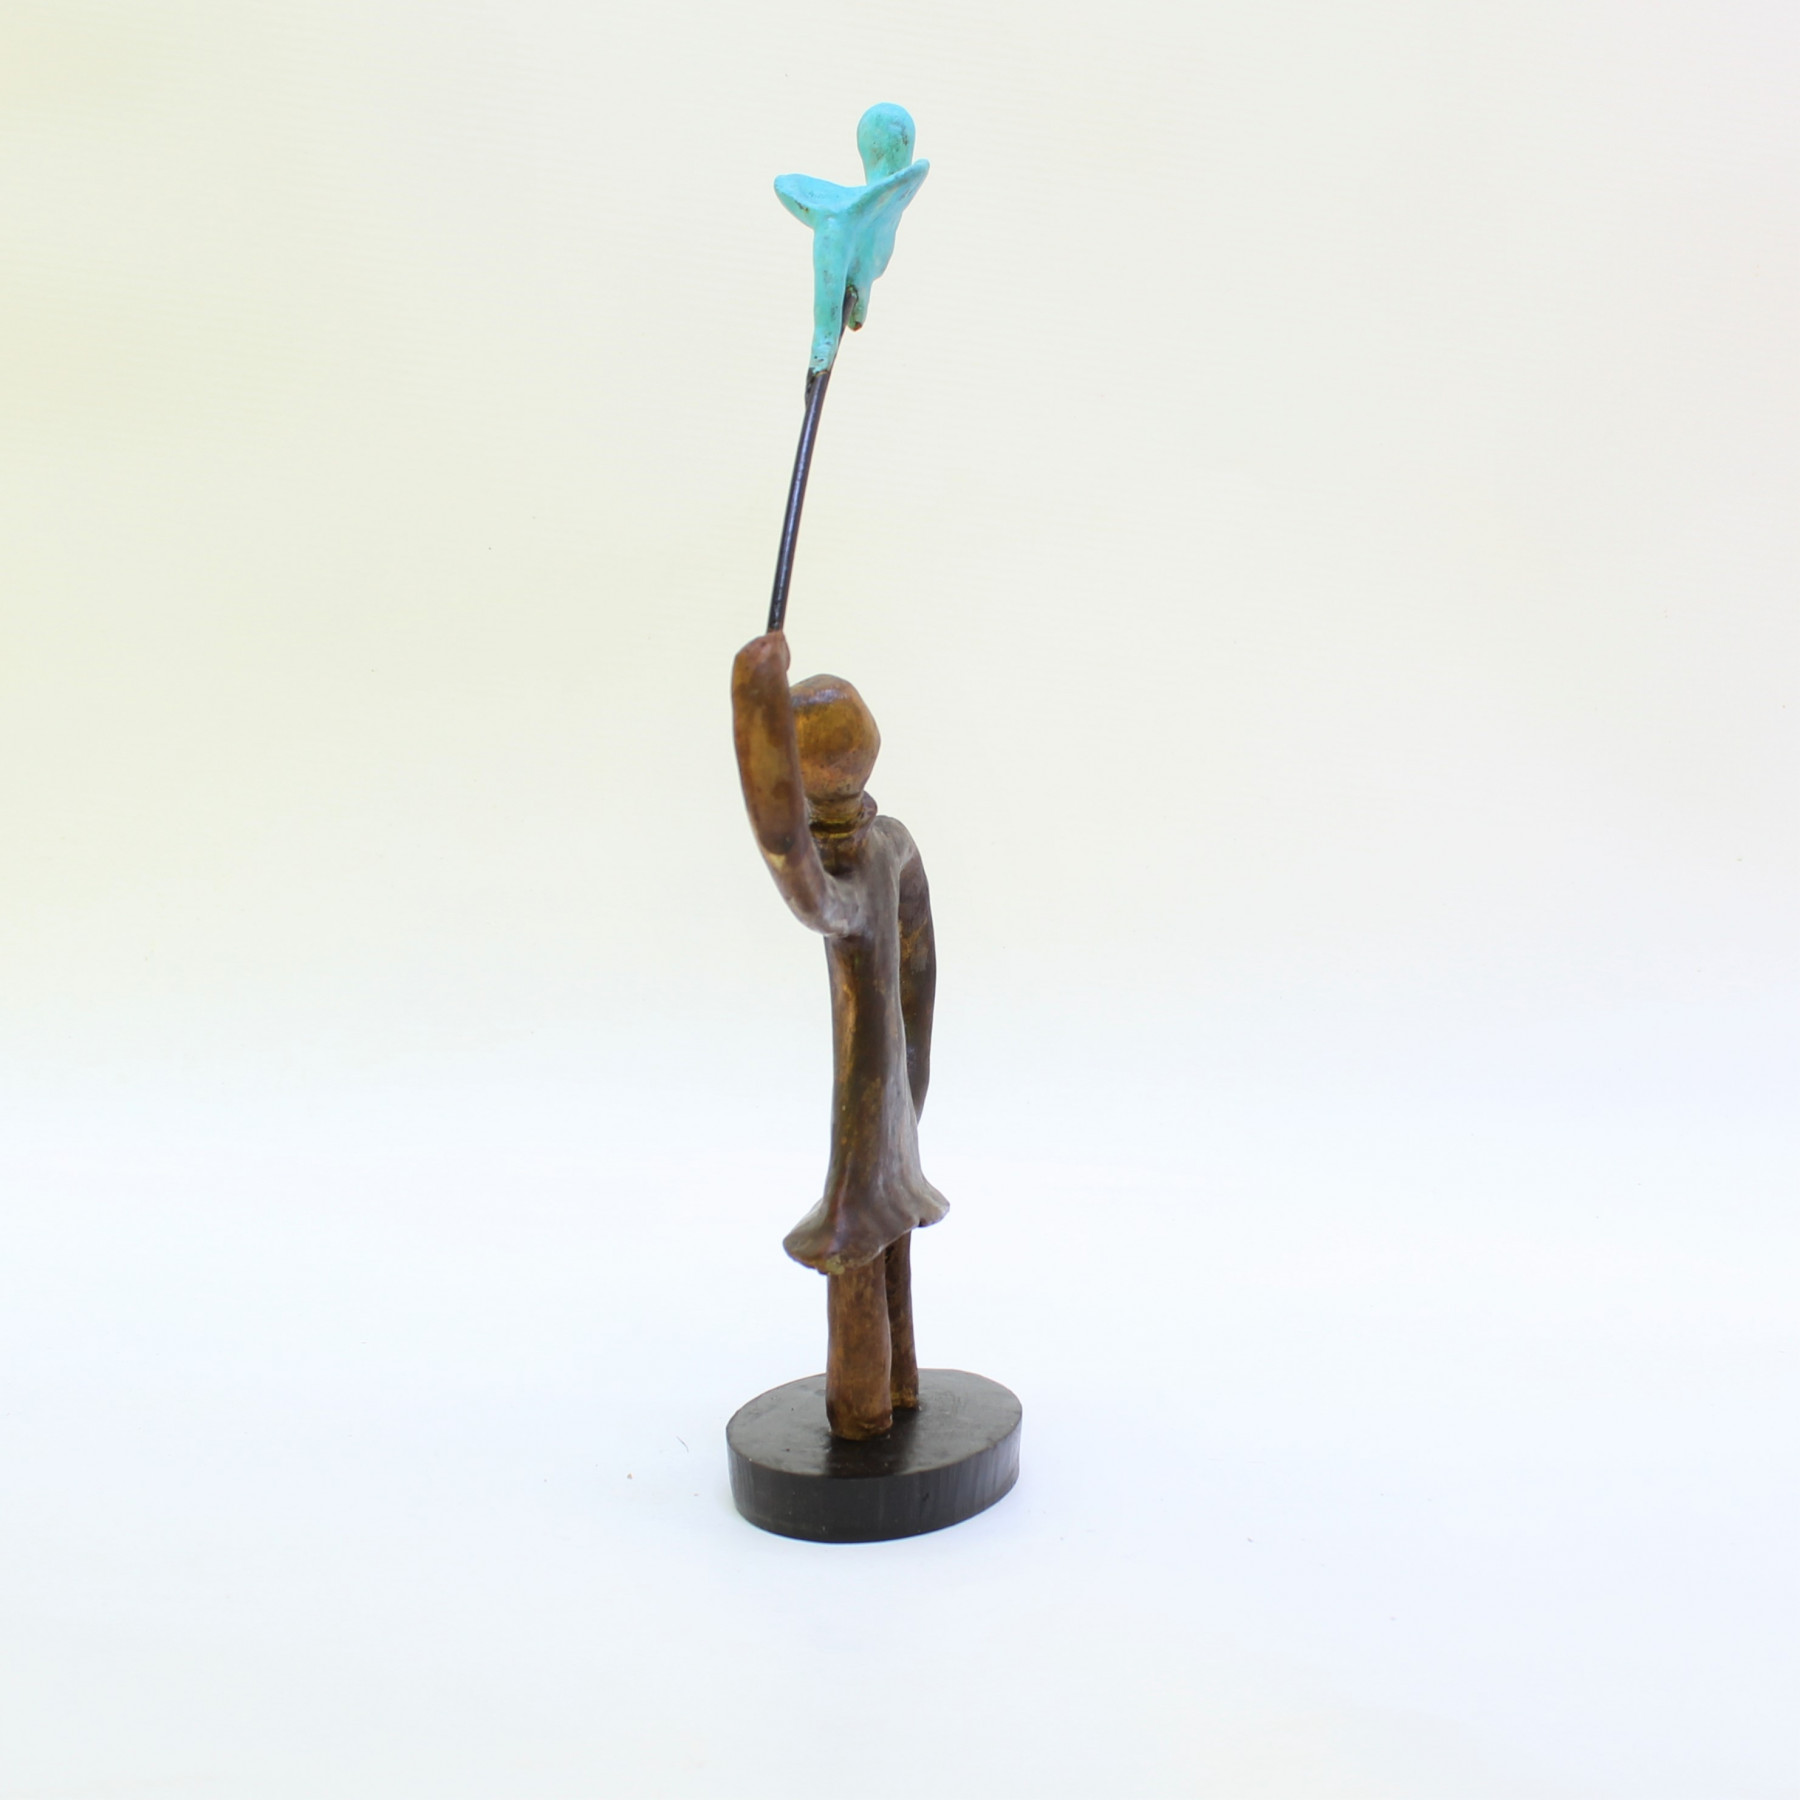 Didier Fournier, Oiseau bleu, sculpture - Artalistic online contemporary art buying and selling gallery